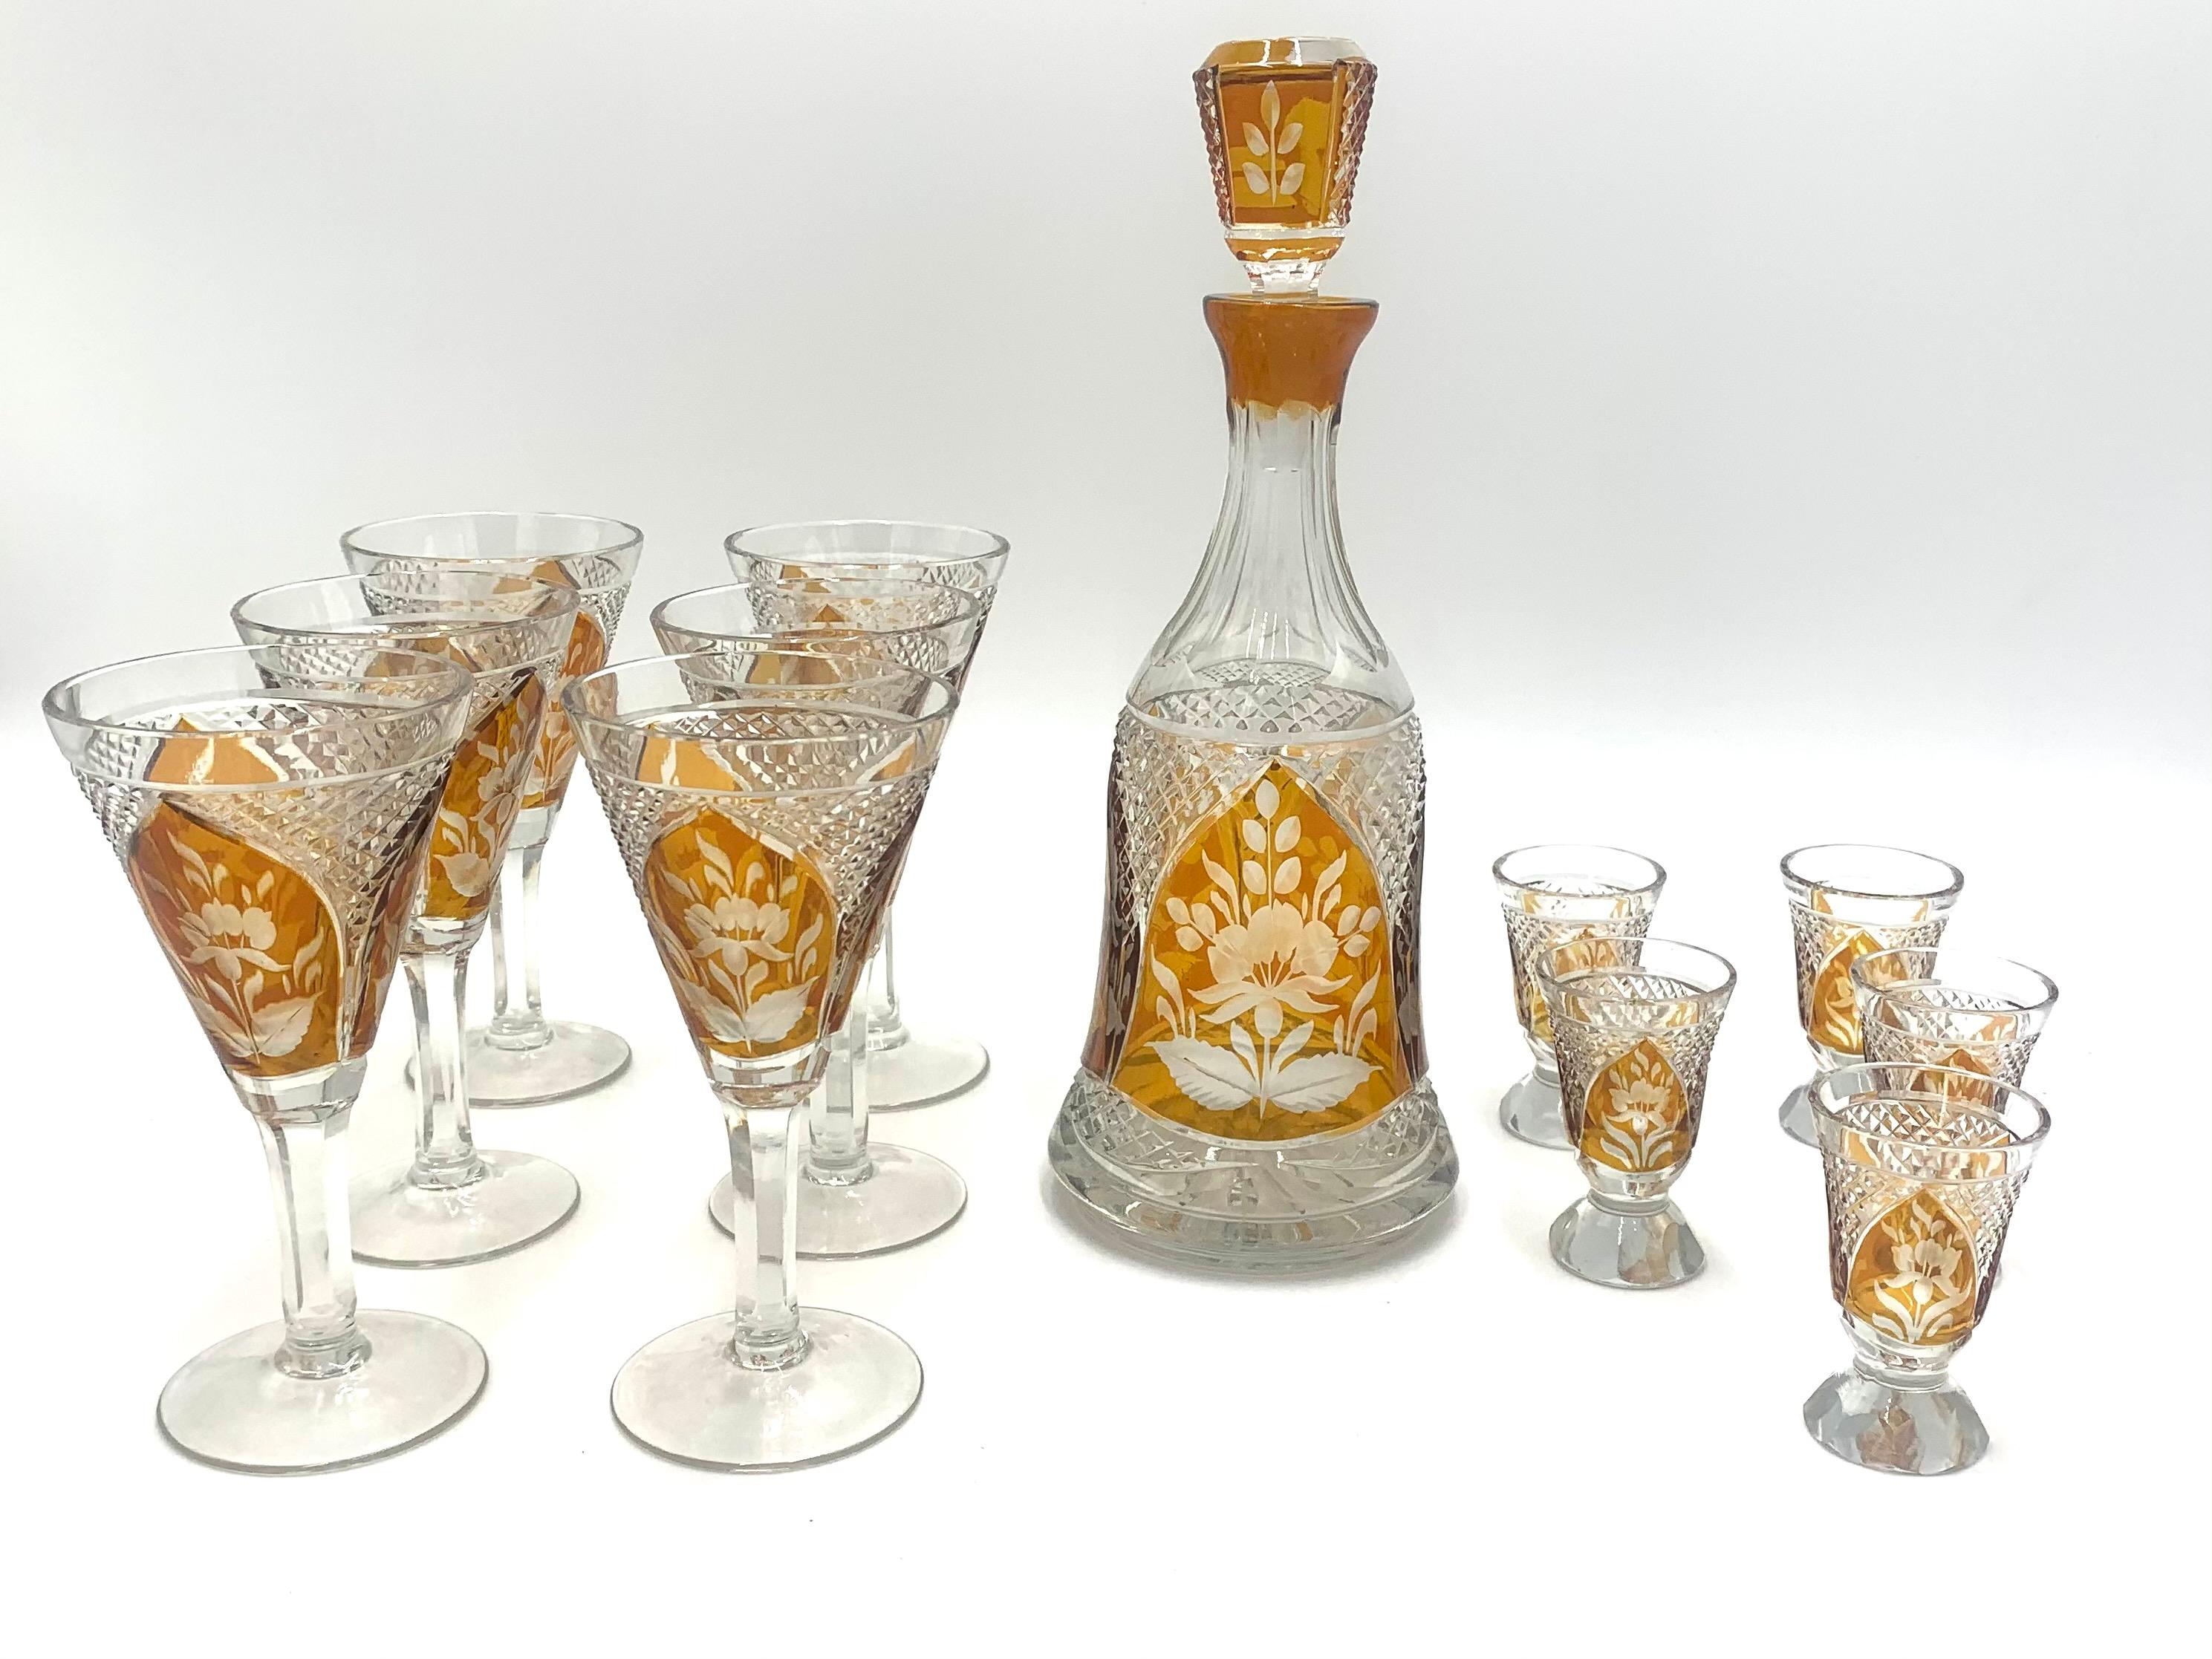 Liqueur set consisting of a decanter with a stopper, 6 liqueur glasses and 5 low vodka glasses.

A crystal set covered with honey glaze, decorated with cut floral motifs.

Probably produced by Józefina Glassworks.

Very good condition.

The